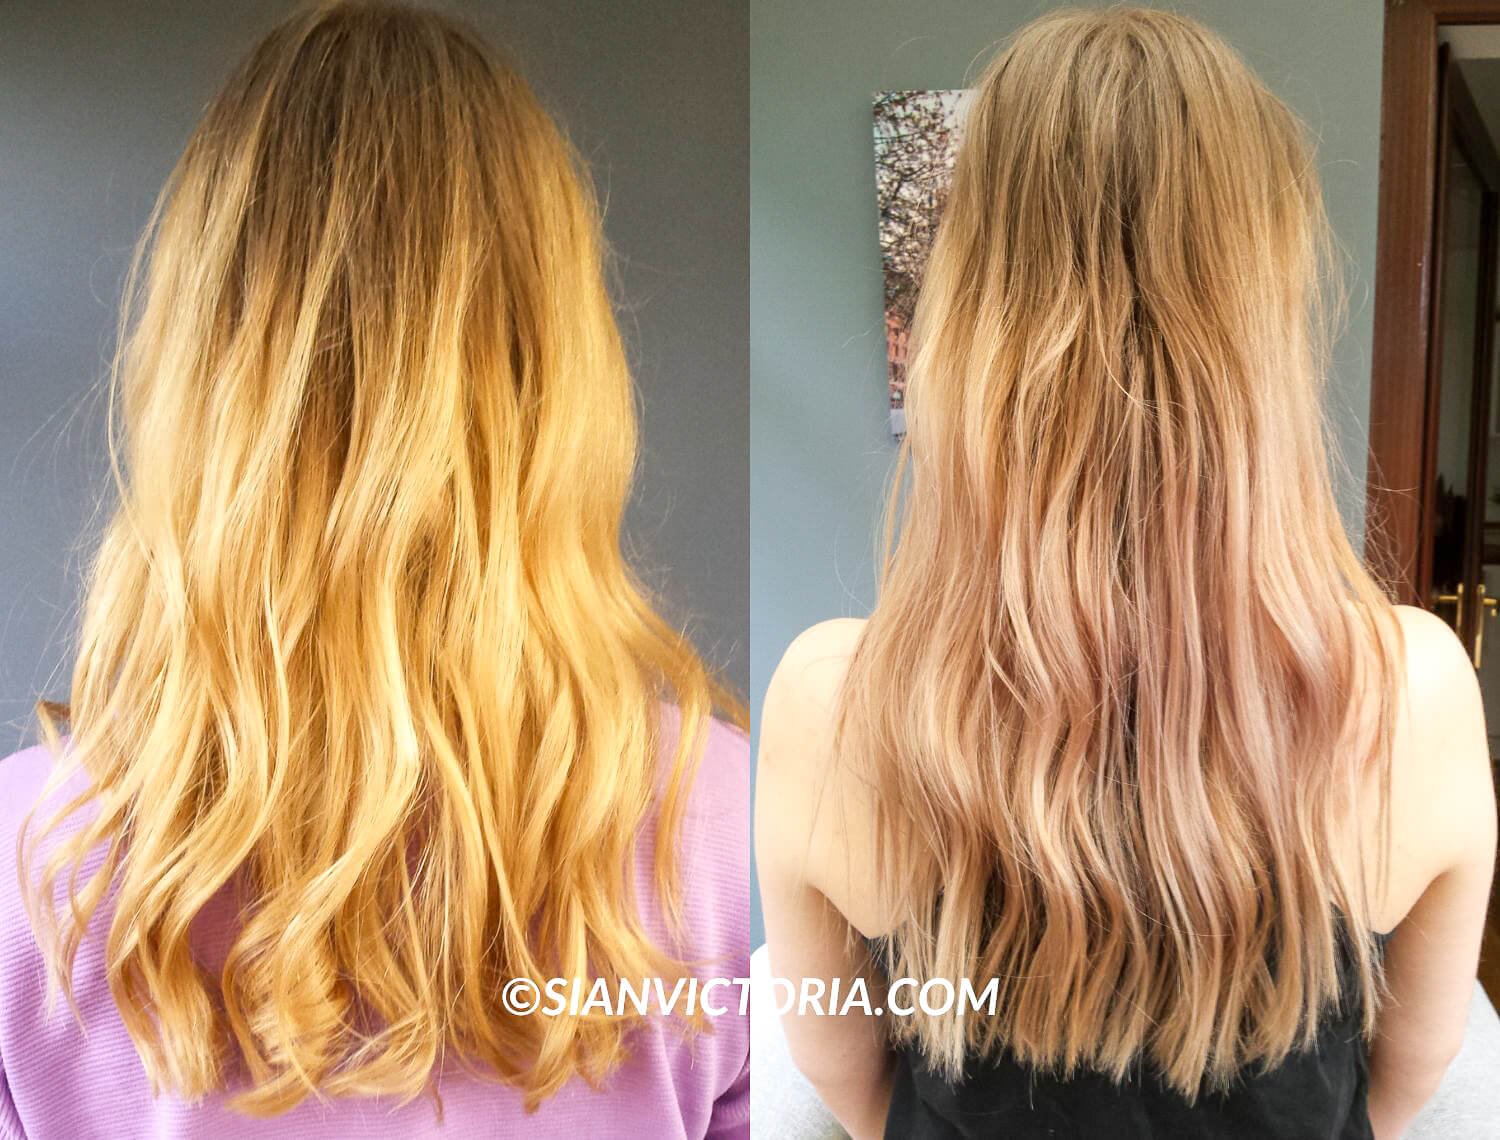 mode Møde Politistation How to get rid of Brassy Blonde Hair - Before & After Purple Toner — Sian  Victoria.